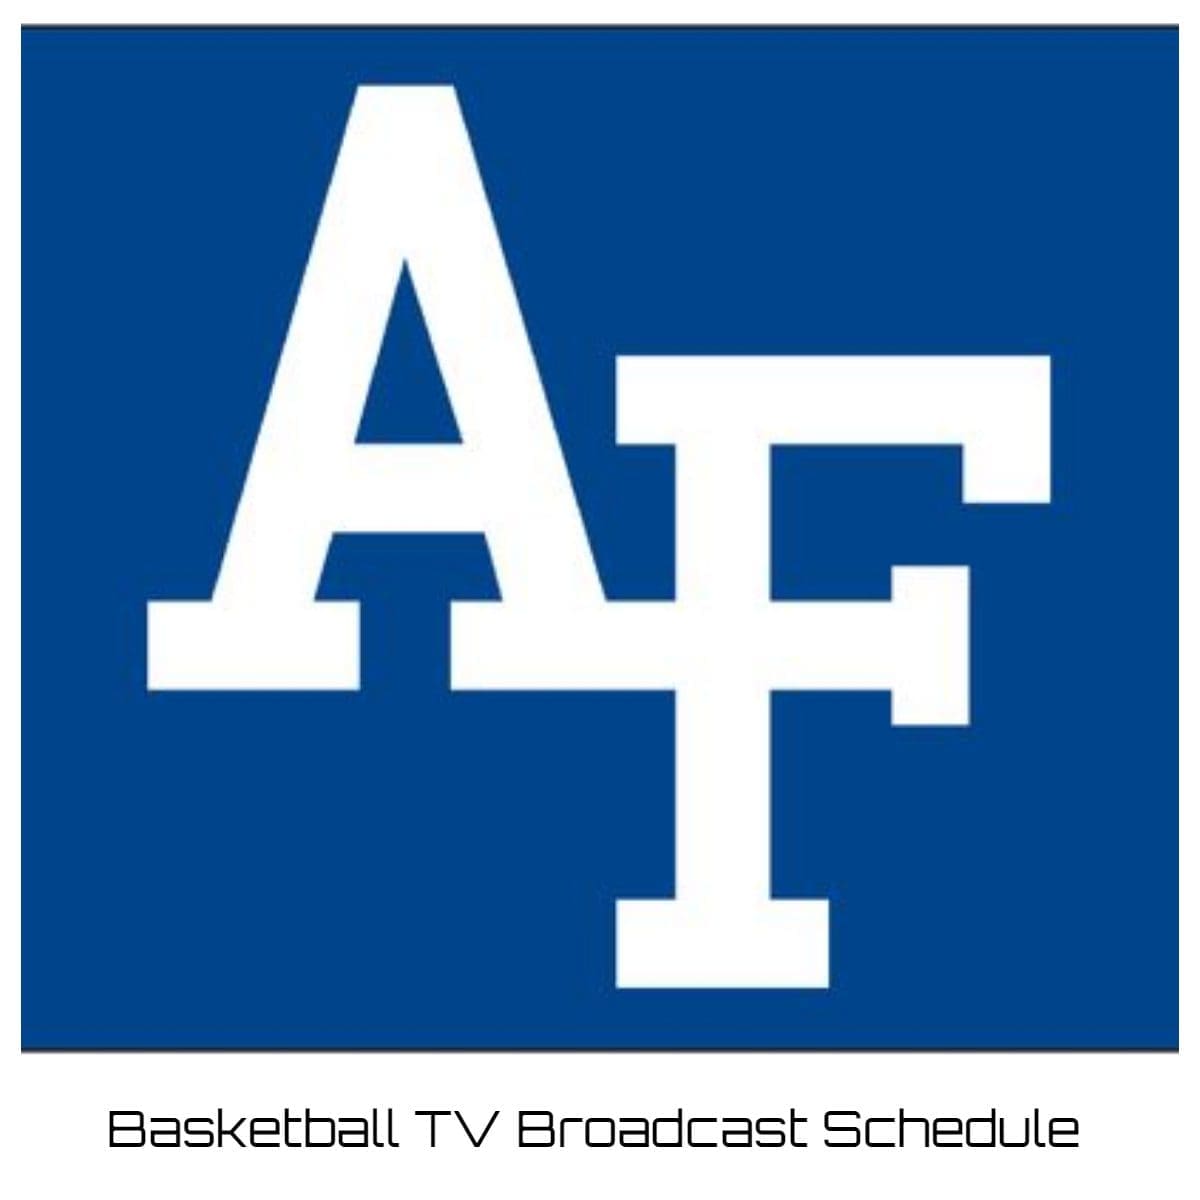 Air Force Falcons Basketball TV Broadcast Schedule